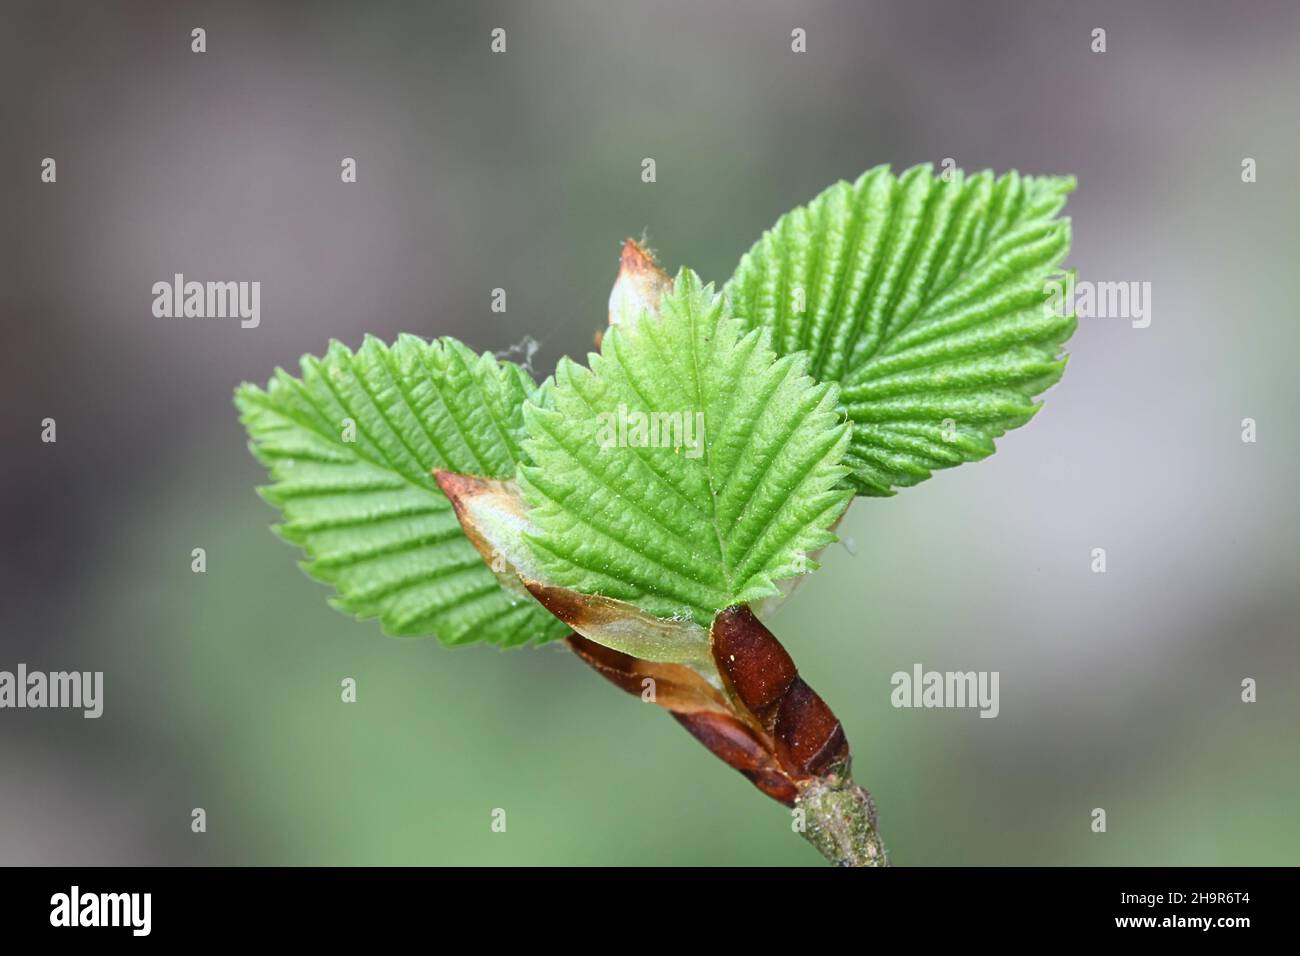 Ulmus laevis, known as the European white elm, fluttering elm or spreading elm, close-up of  new leaves Stock Photo